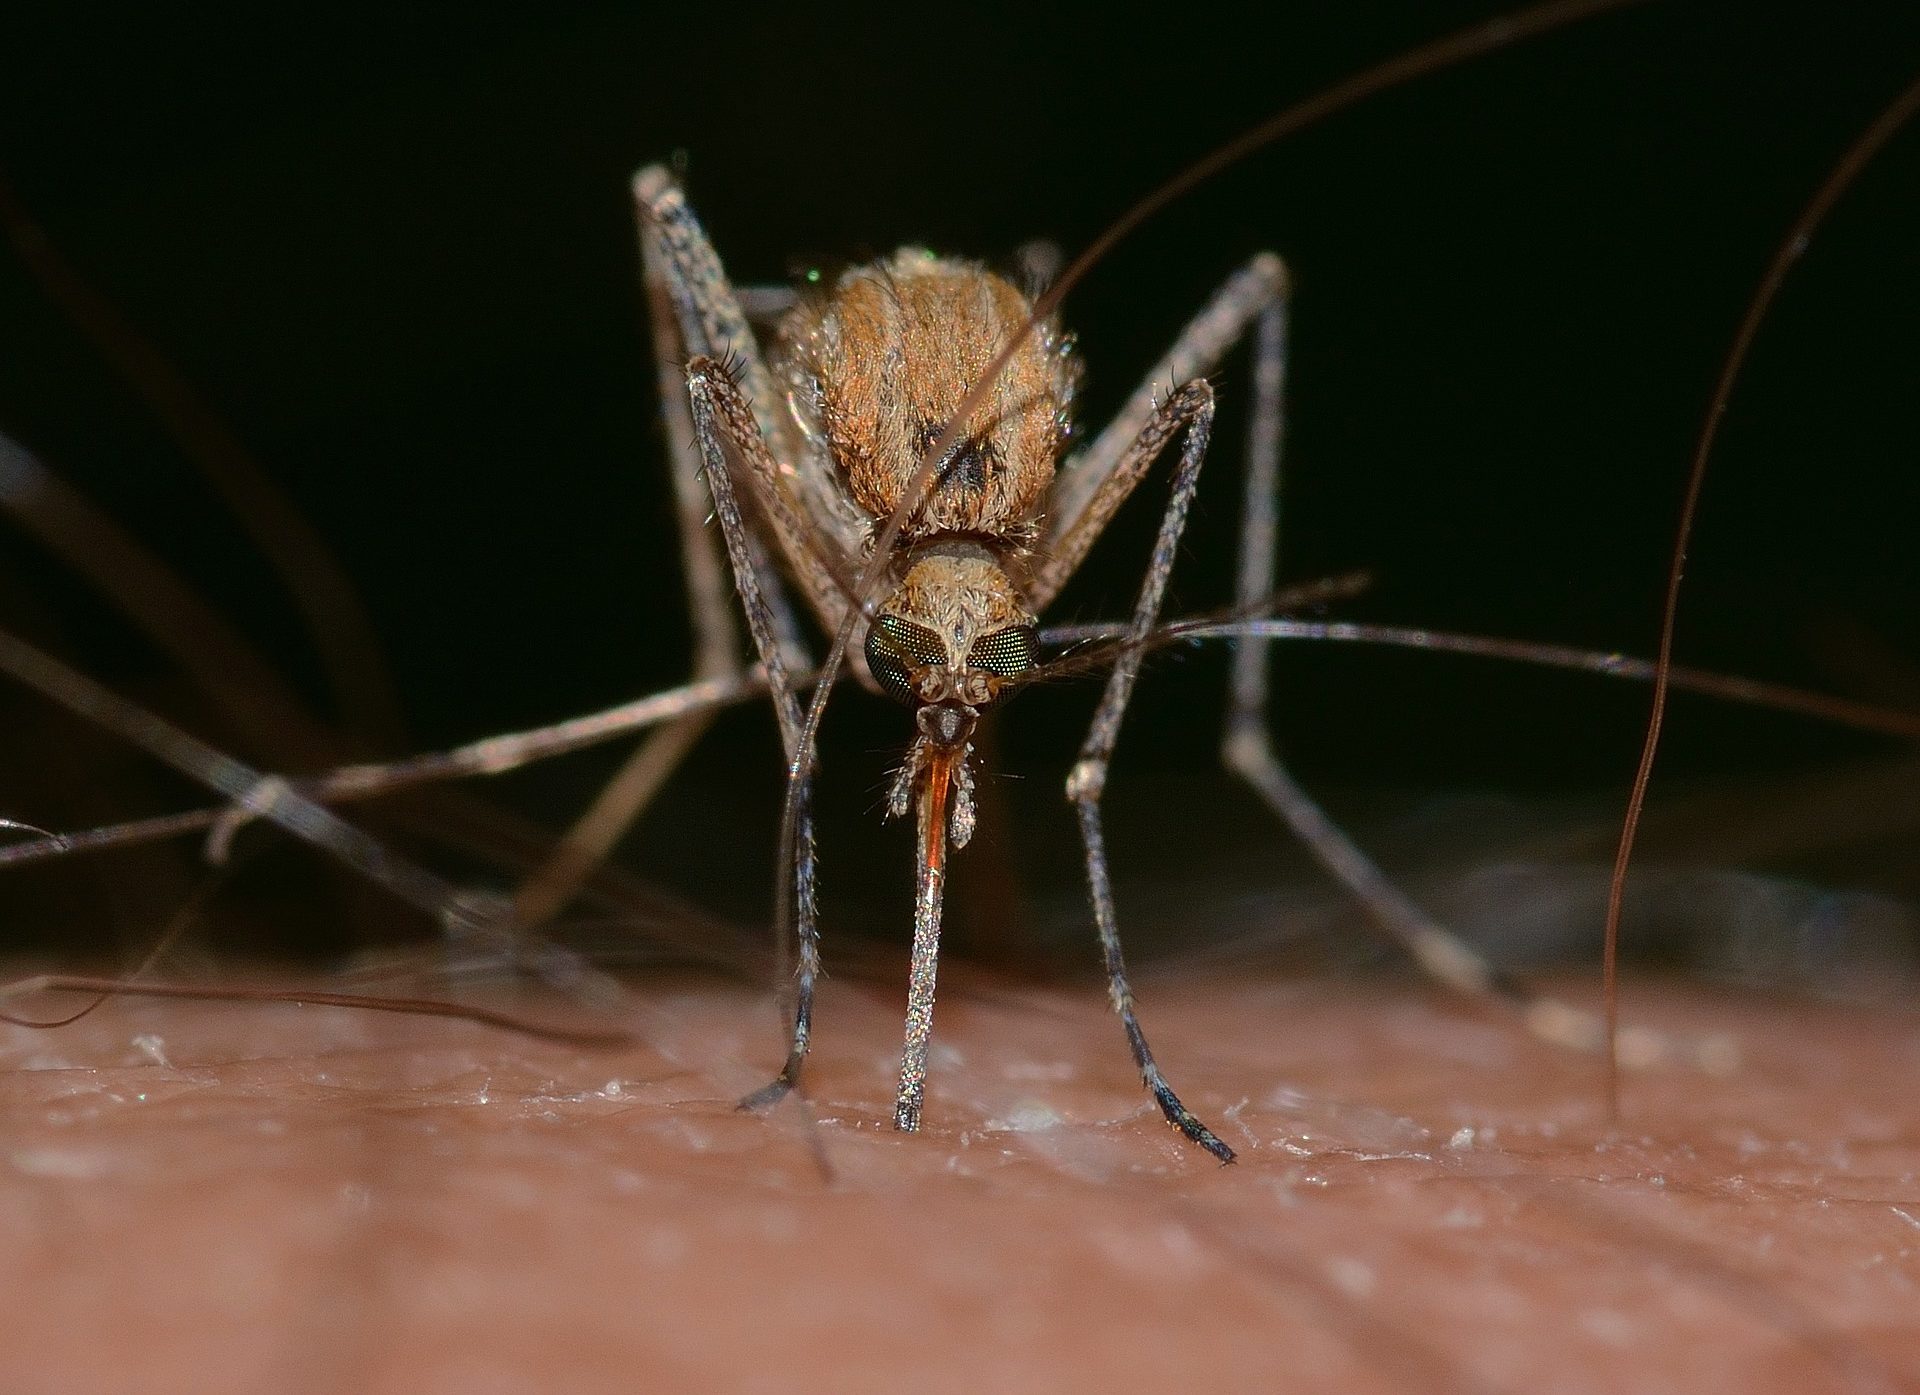 West Nile Virus Transmission May Shift Due to Climate Change - Genetic Engineering & Biotechnology News